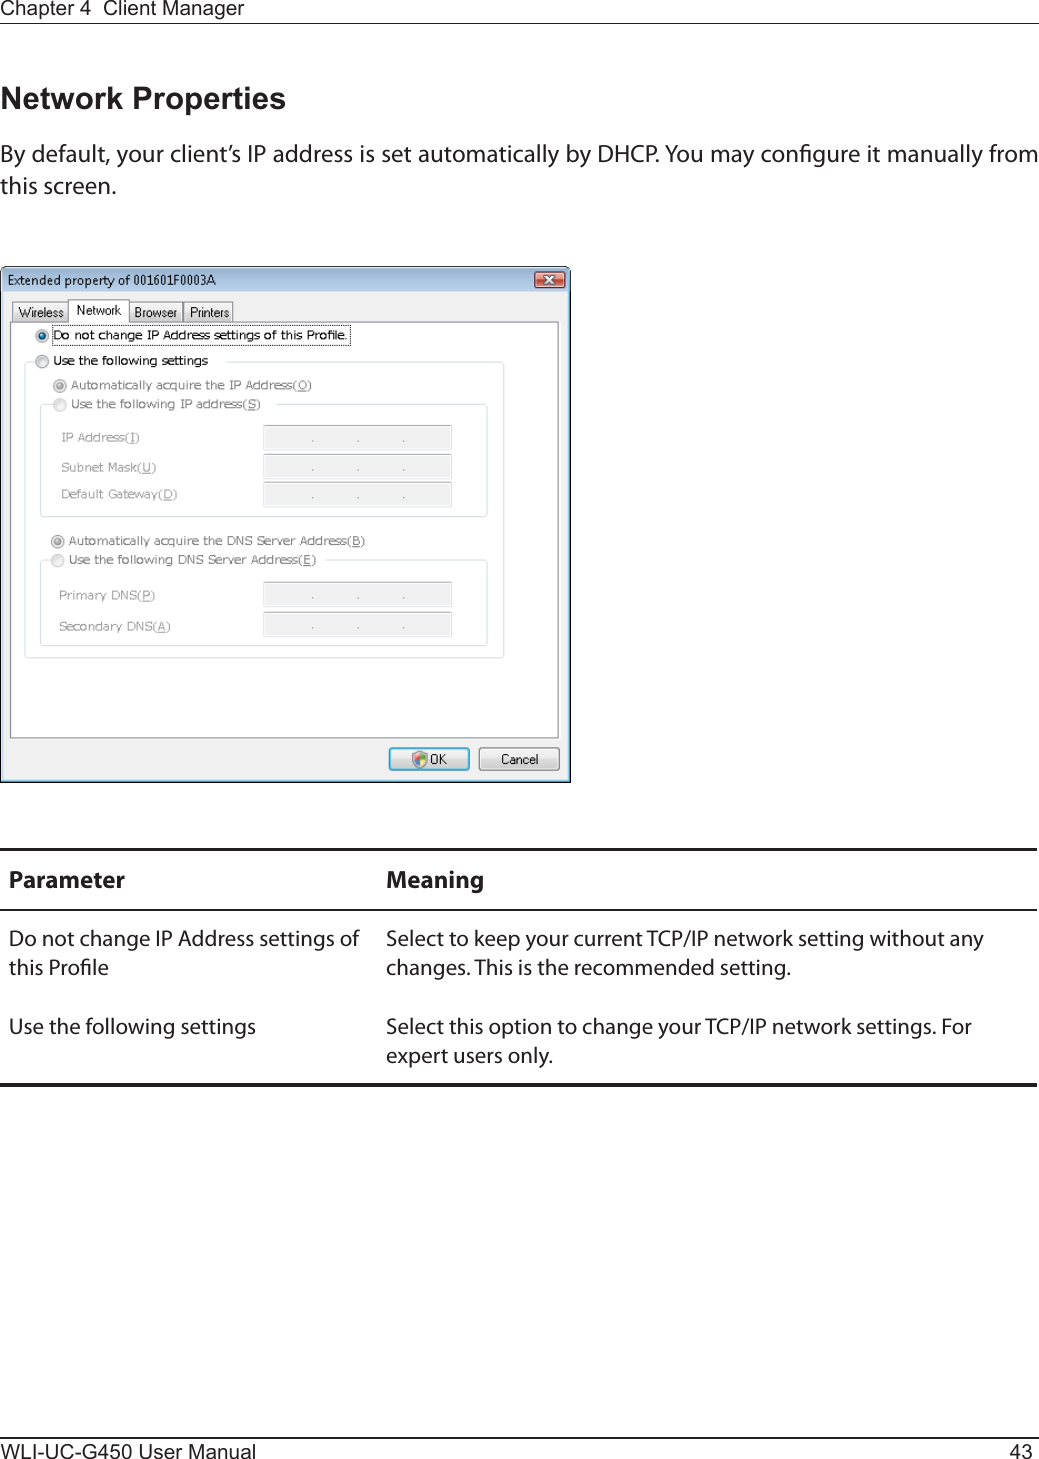 Chapter 4  Client ManagerWLI-UC-G450 User Manual 43Network PropertiesBy default, your client’s IP address is set automatically by DHCP. You may congure it manually from this screen.Parameter MeaningDo not change IP Address settings of this ProleSelect to keep your current TCP/IP network setting without any changes. This is the recommended setting.Use the following settings Select this option to change your TCP/IP network settings. For expert users only. 